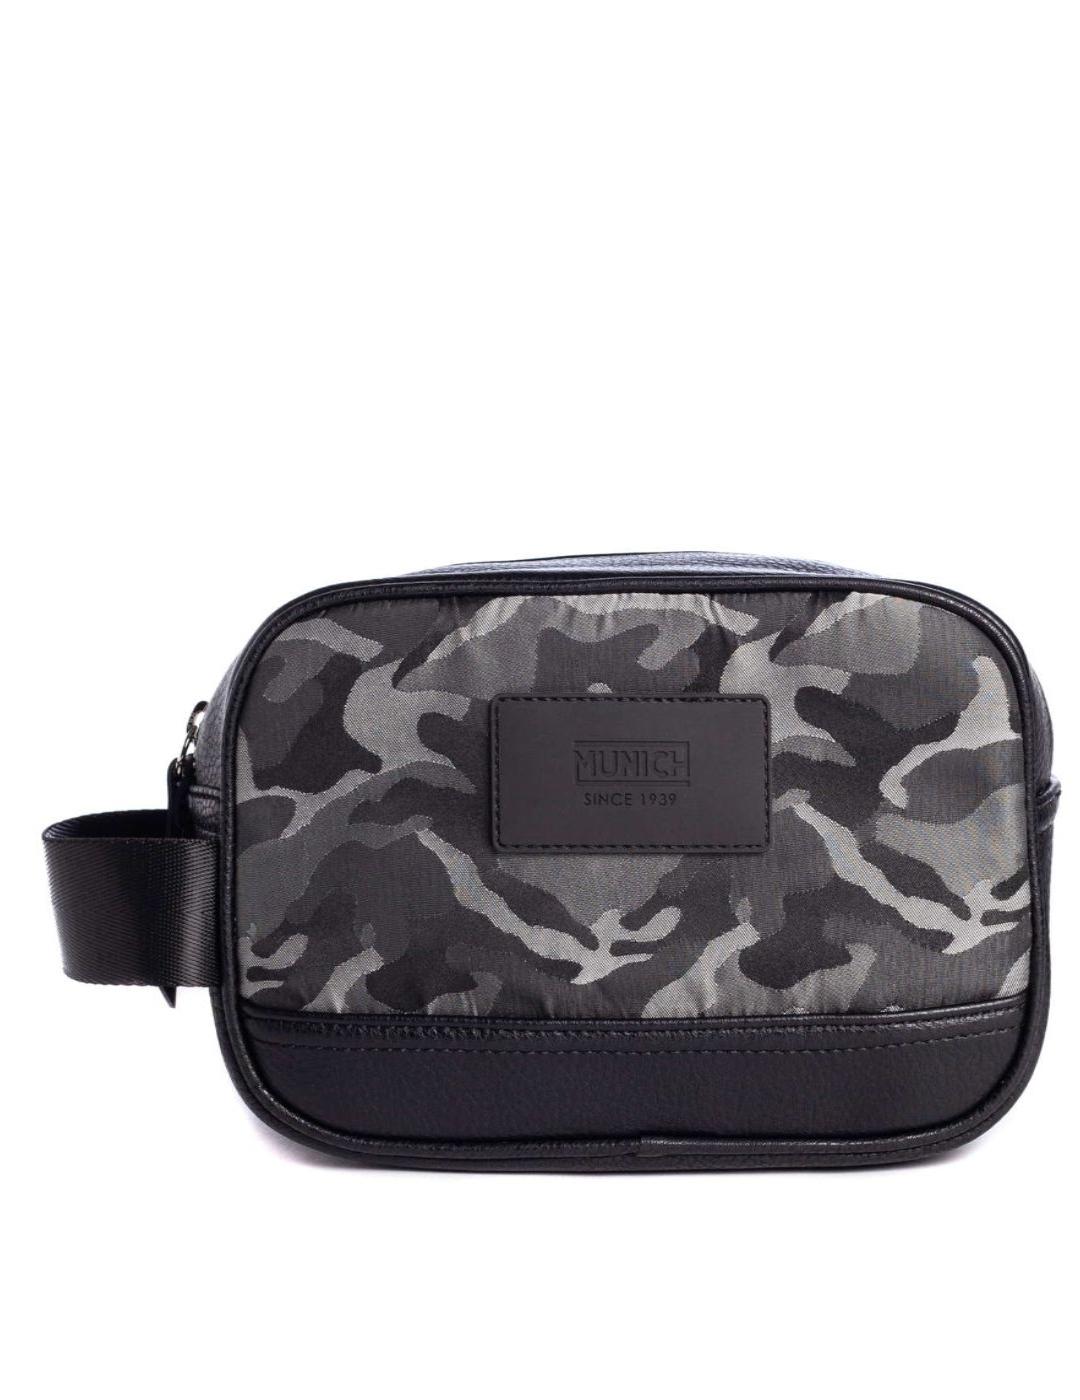 TOILETRY JUNGLE BLACK CAMOUFLAGE-Y